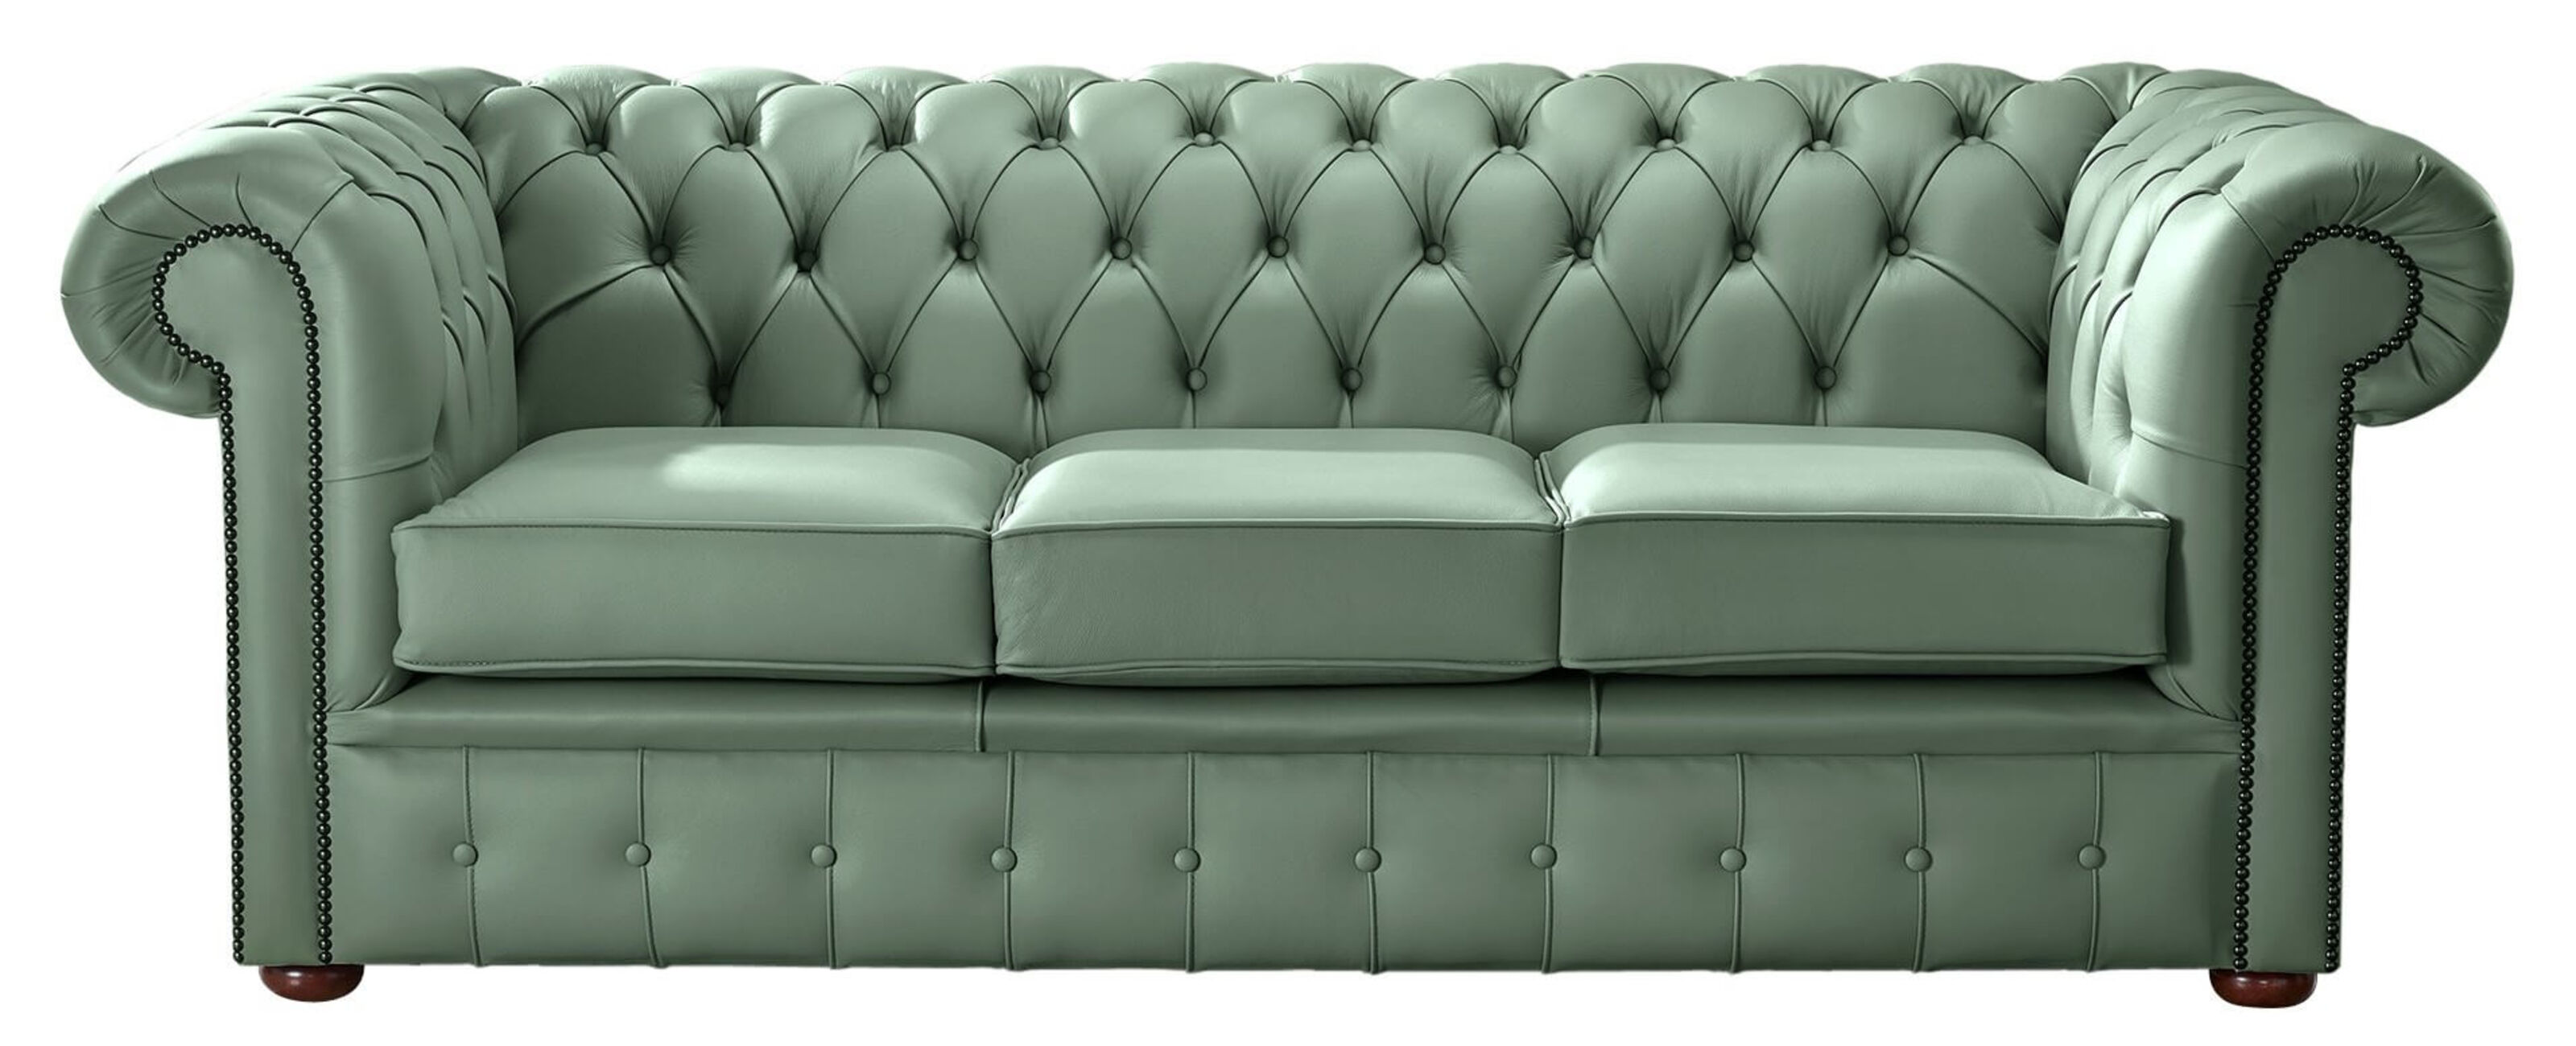 Crafting Your Dream Space with a Bespoke Chesterfield Sofa  %Post Title